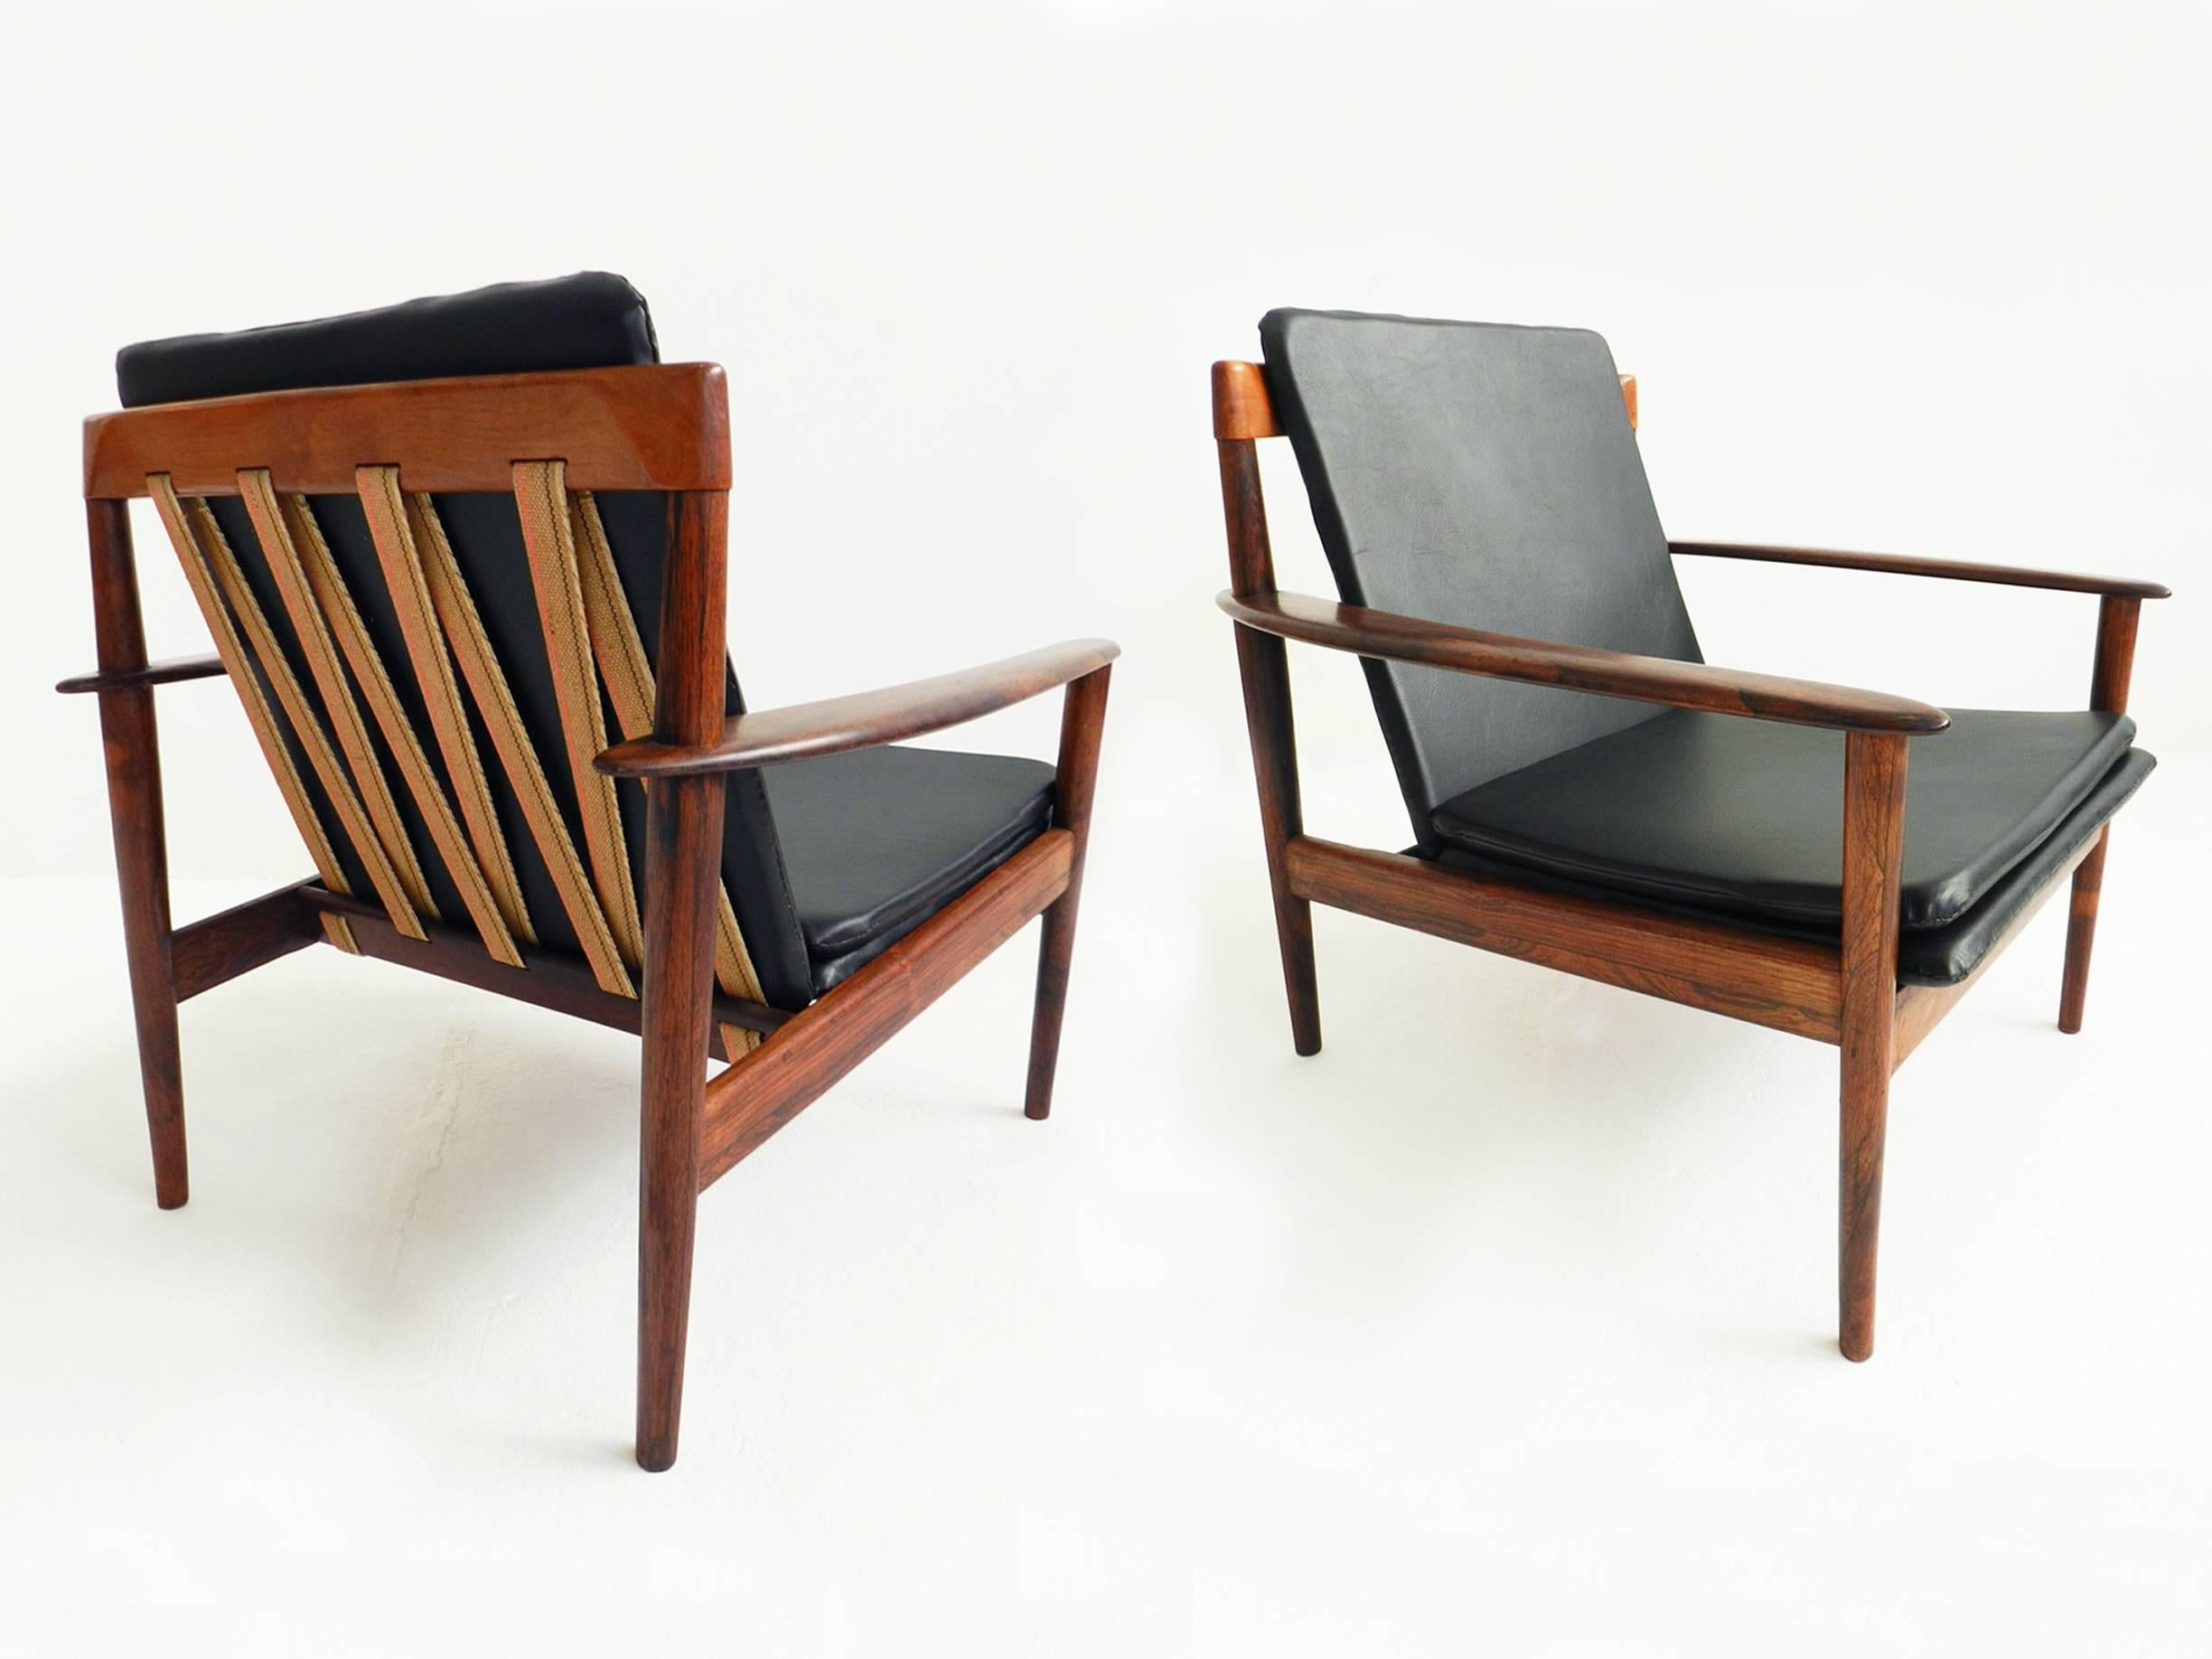 Beautiful and rare first edition1
950s Grete Jalk lounge chair, Mod. PJ (Poul Jeppesen) 56/1 (Model 56).